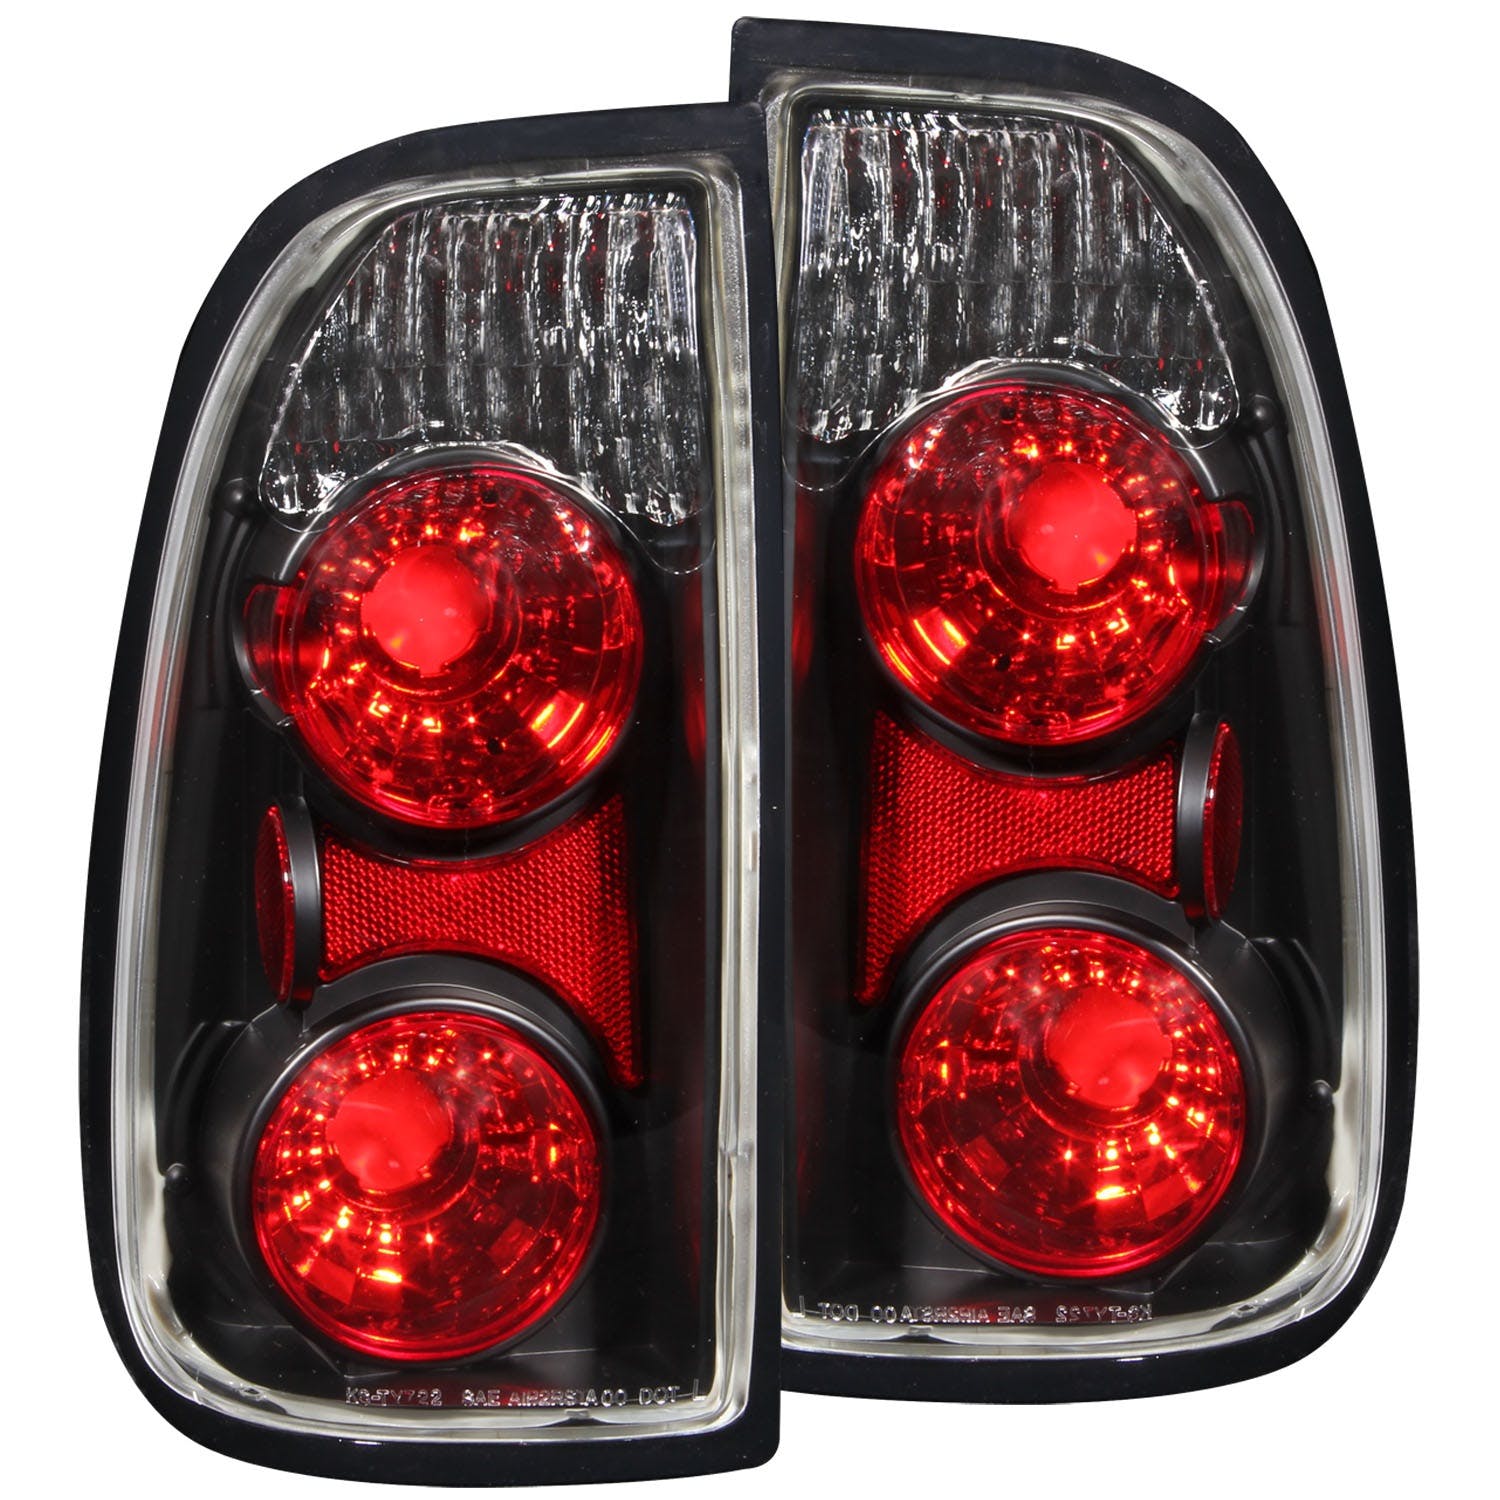 AnzoUSA 211126 Taillights Black